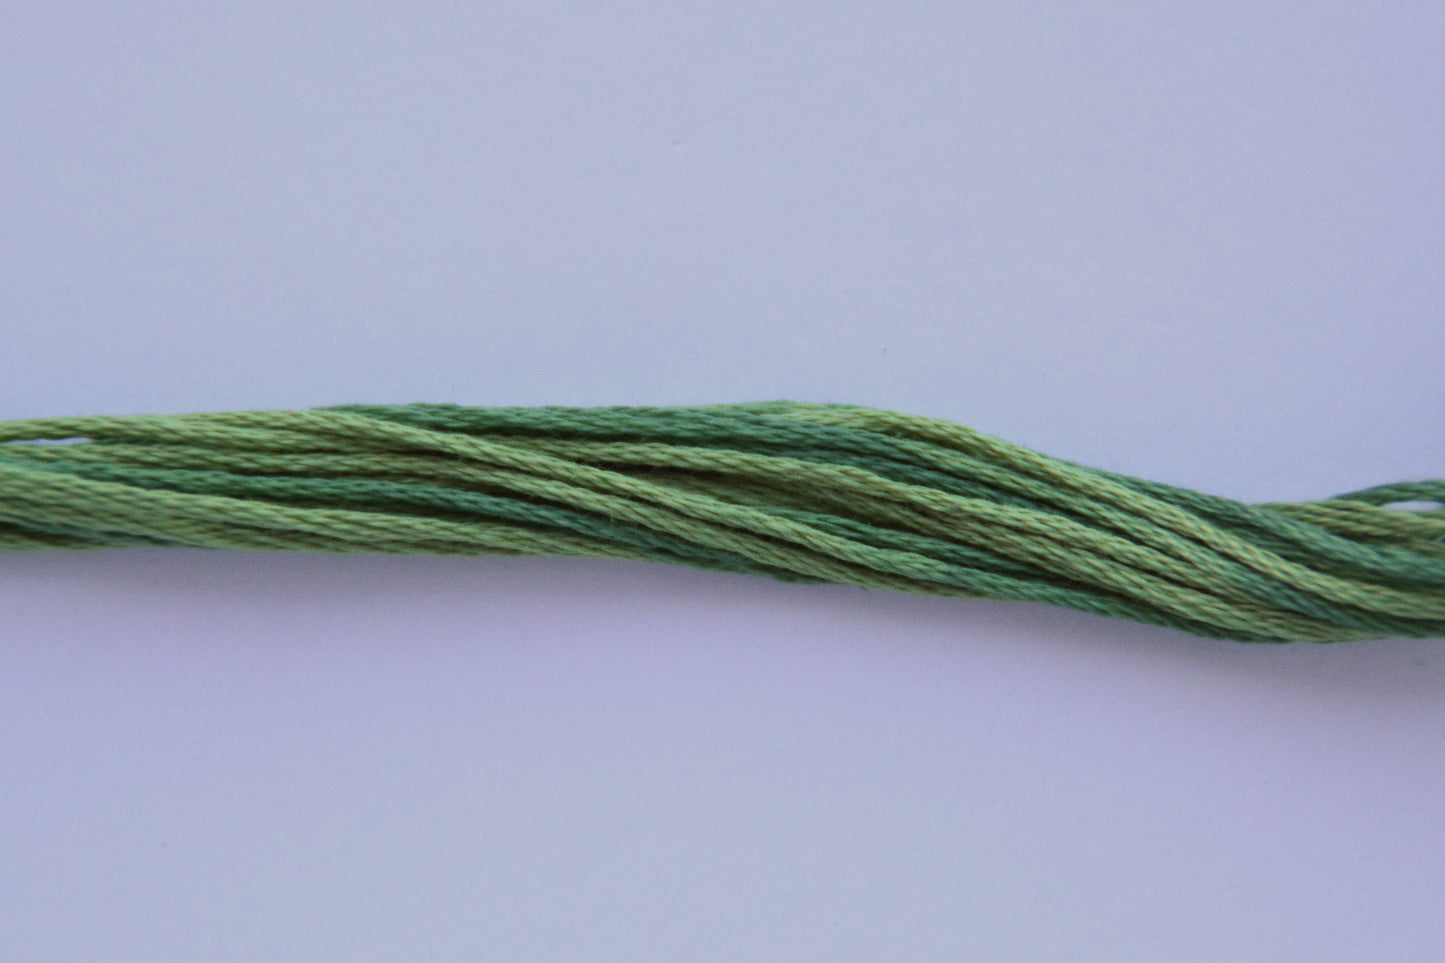 Bayberry 2166 Weeks Dye Works 6-Strand Hand-Dyed Embroidery Floss